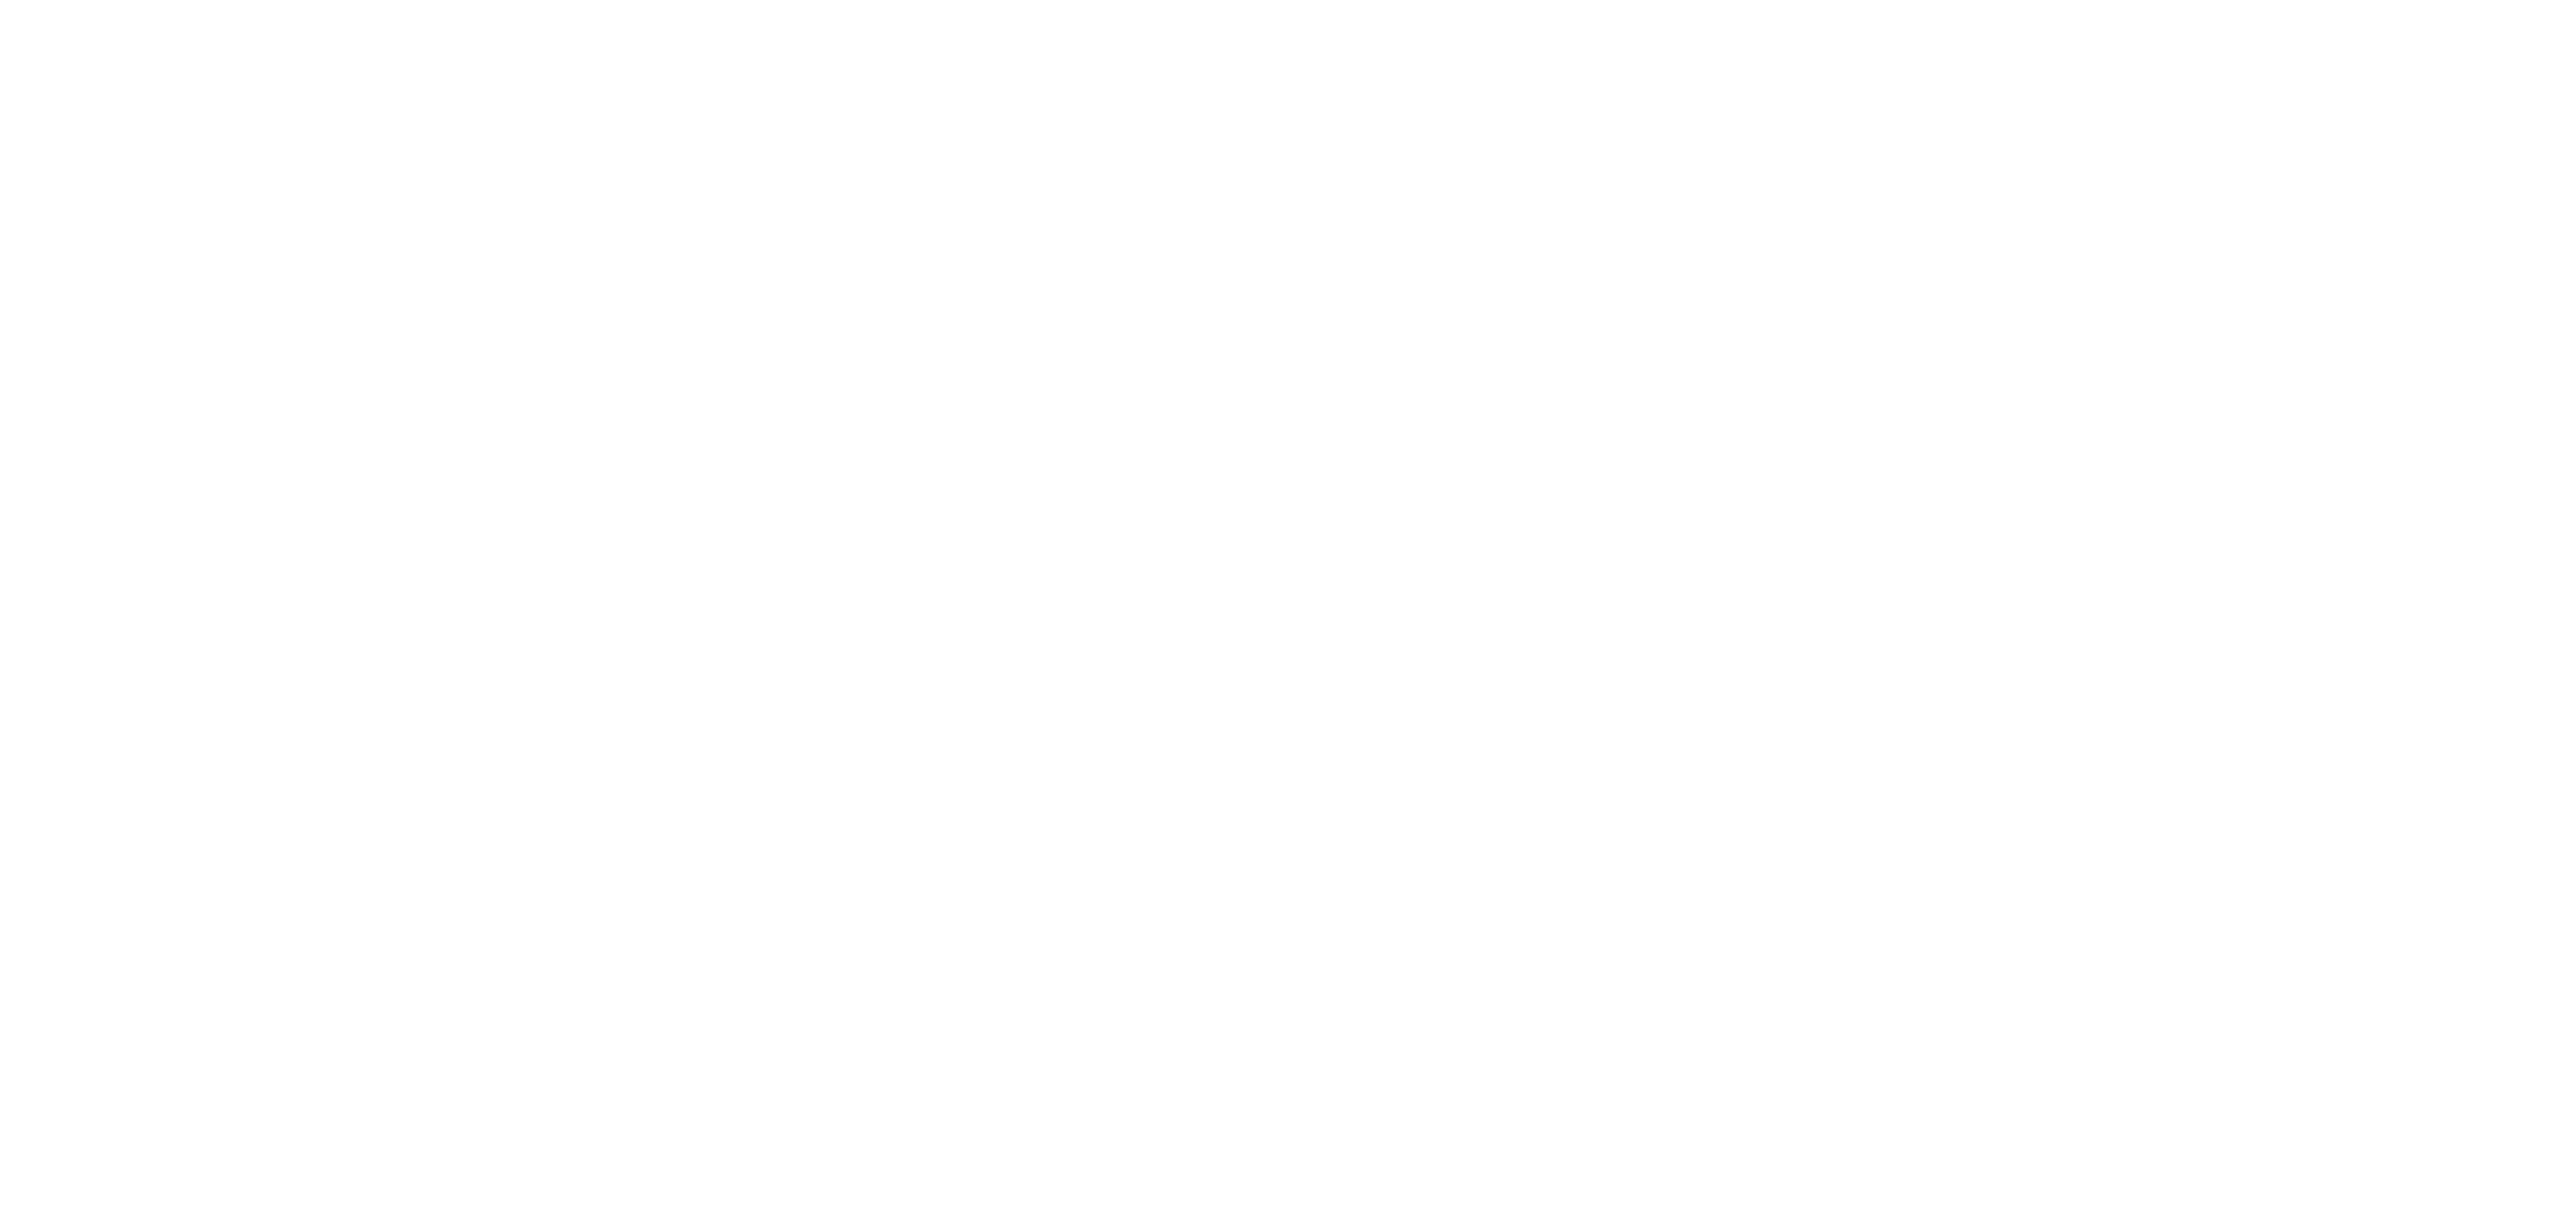  DruidShakespeare – Richard II, Henry IV & Henry V by William Shakespeare in a new adaptation by Mark O’Rowe directed by Garry Hynes in a co-production with Lincoln Center Festival